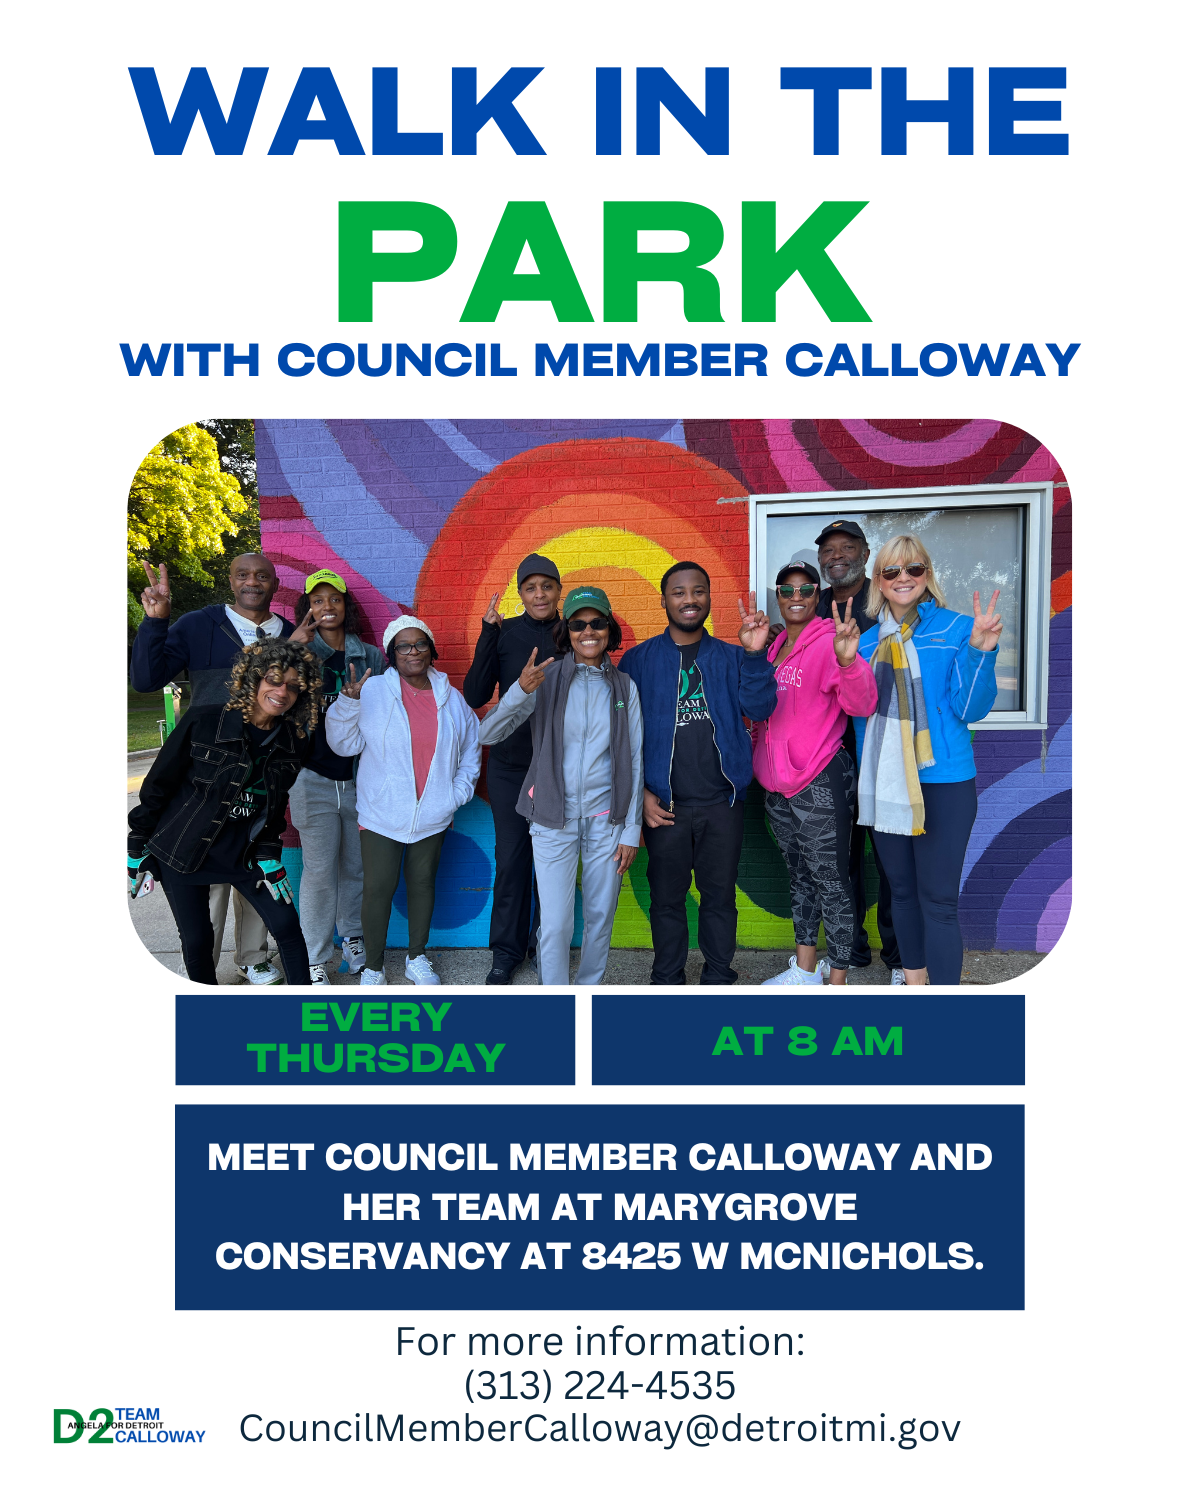 Walk in the Park with Council Member Whitfield Calloway